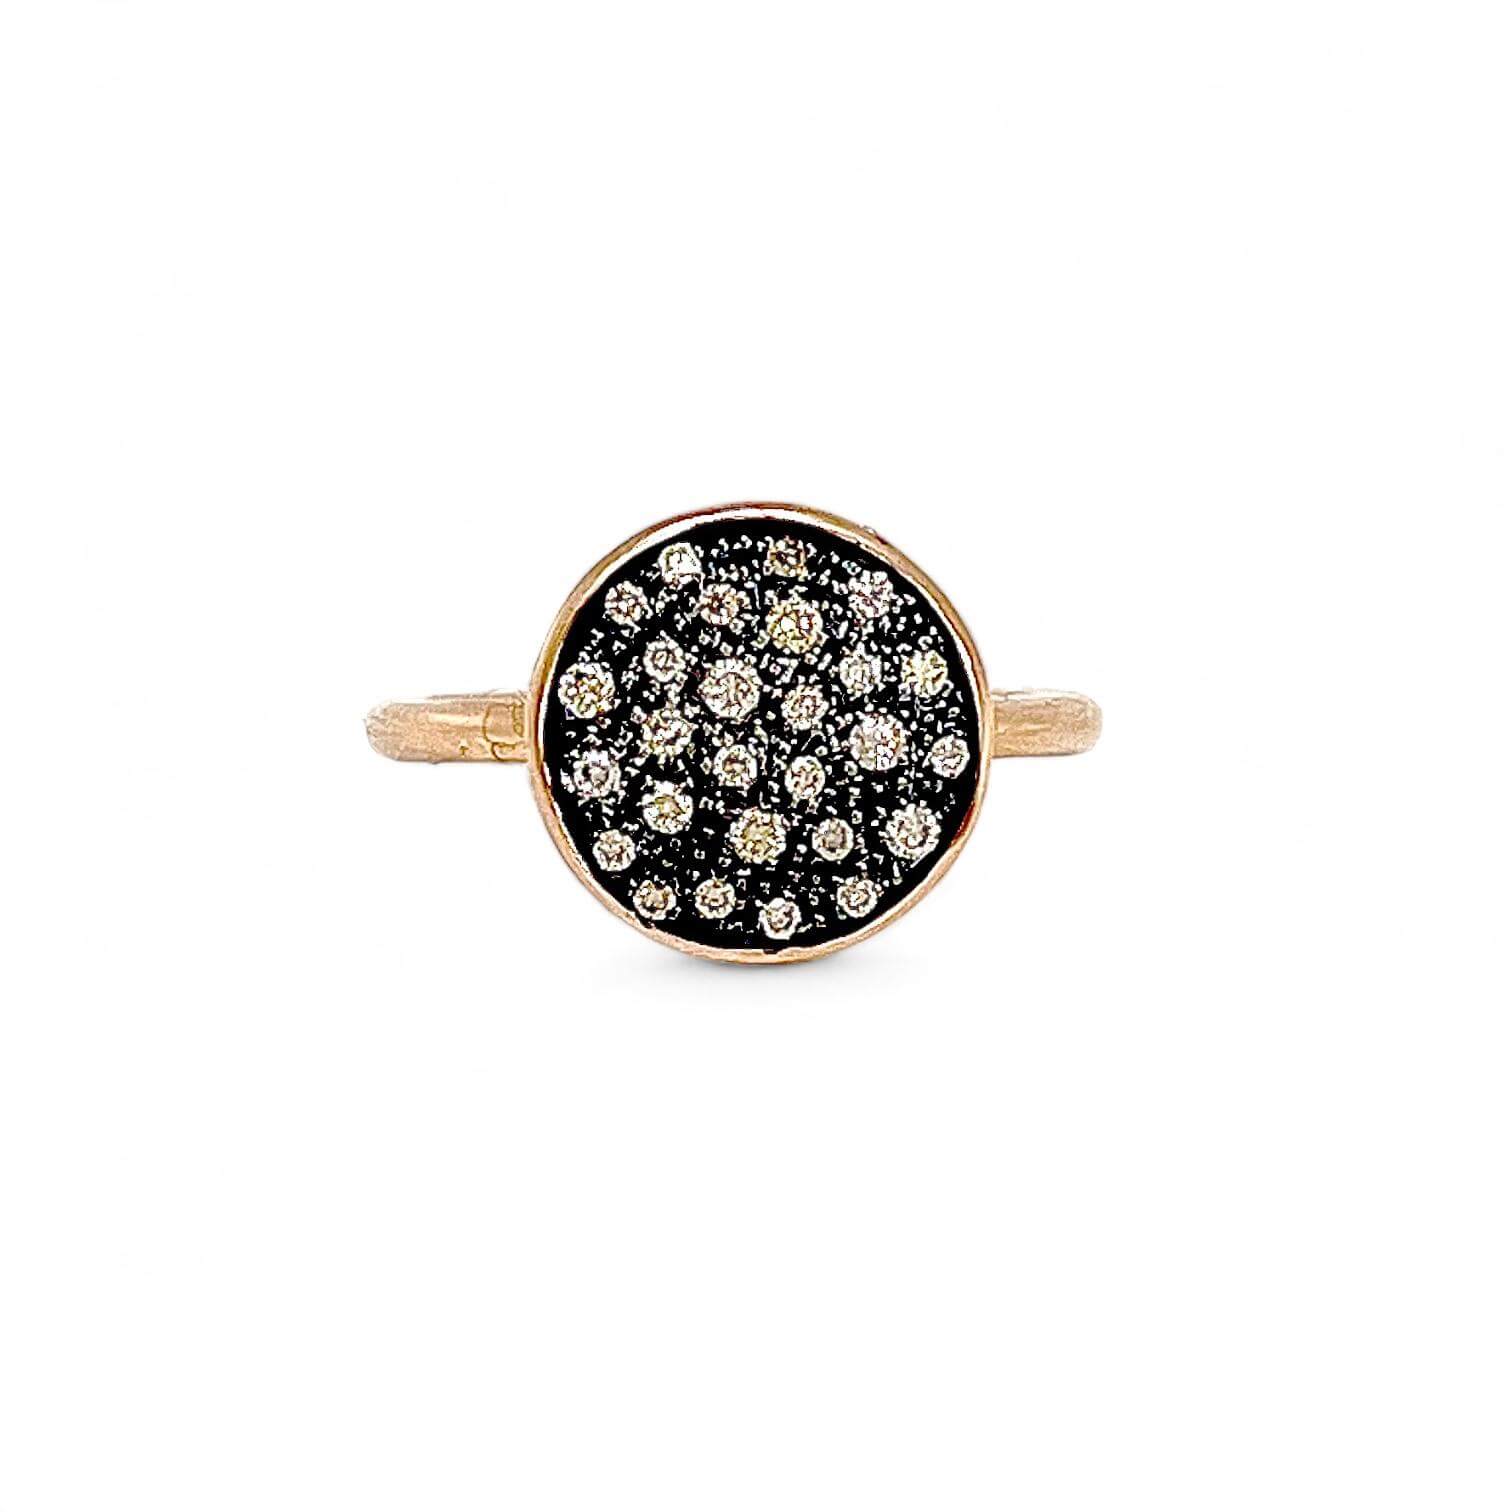 TOPPINA rose gold and diamond ring Art. 7771BW